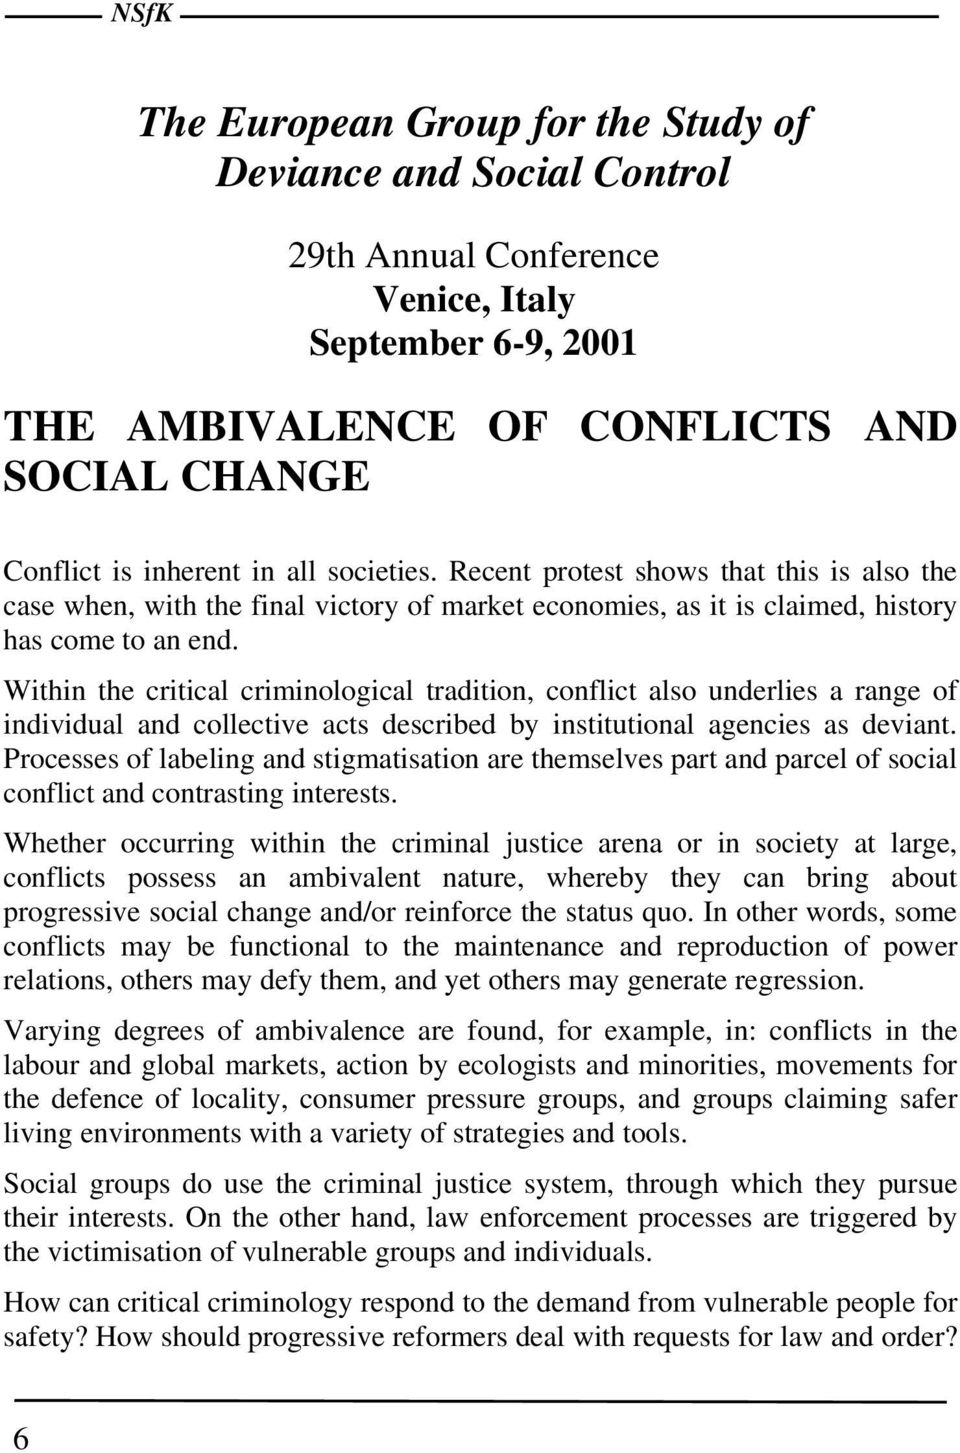 Within the critical criminological tradition, conflict also underlies a range of individual and collective acts described by institutional agencies as deviant.